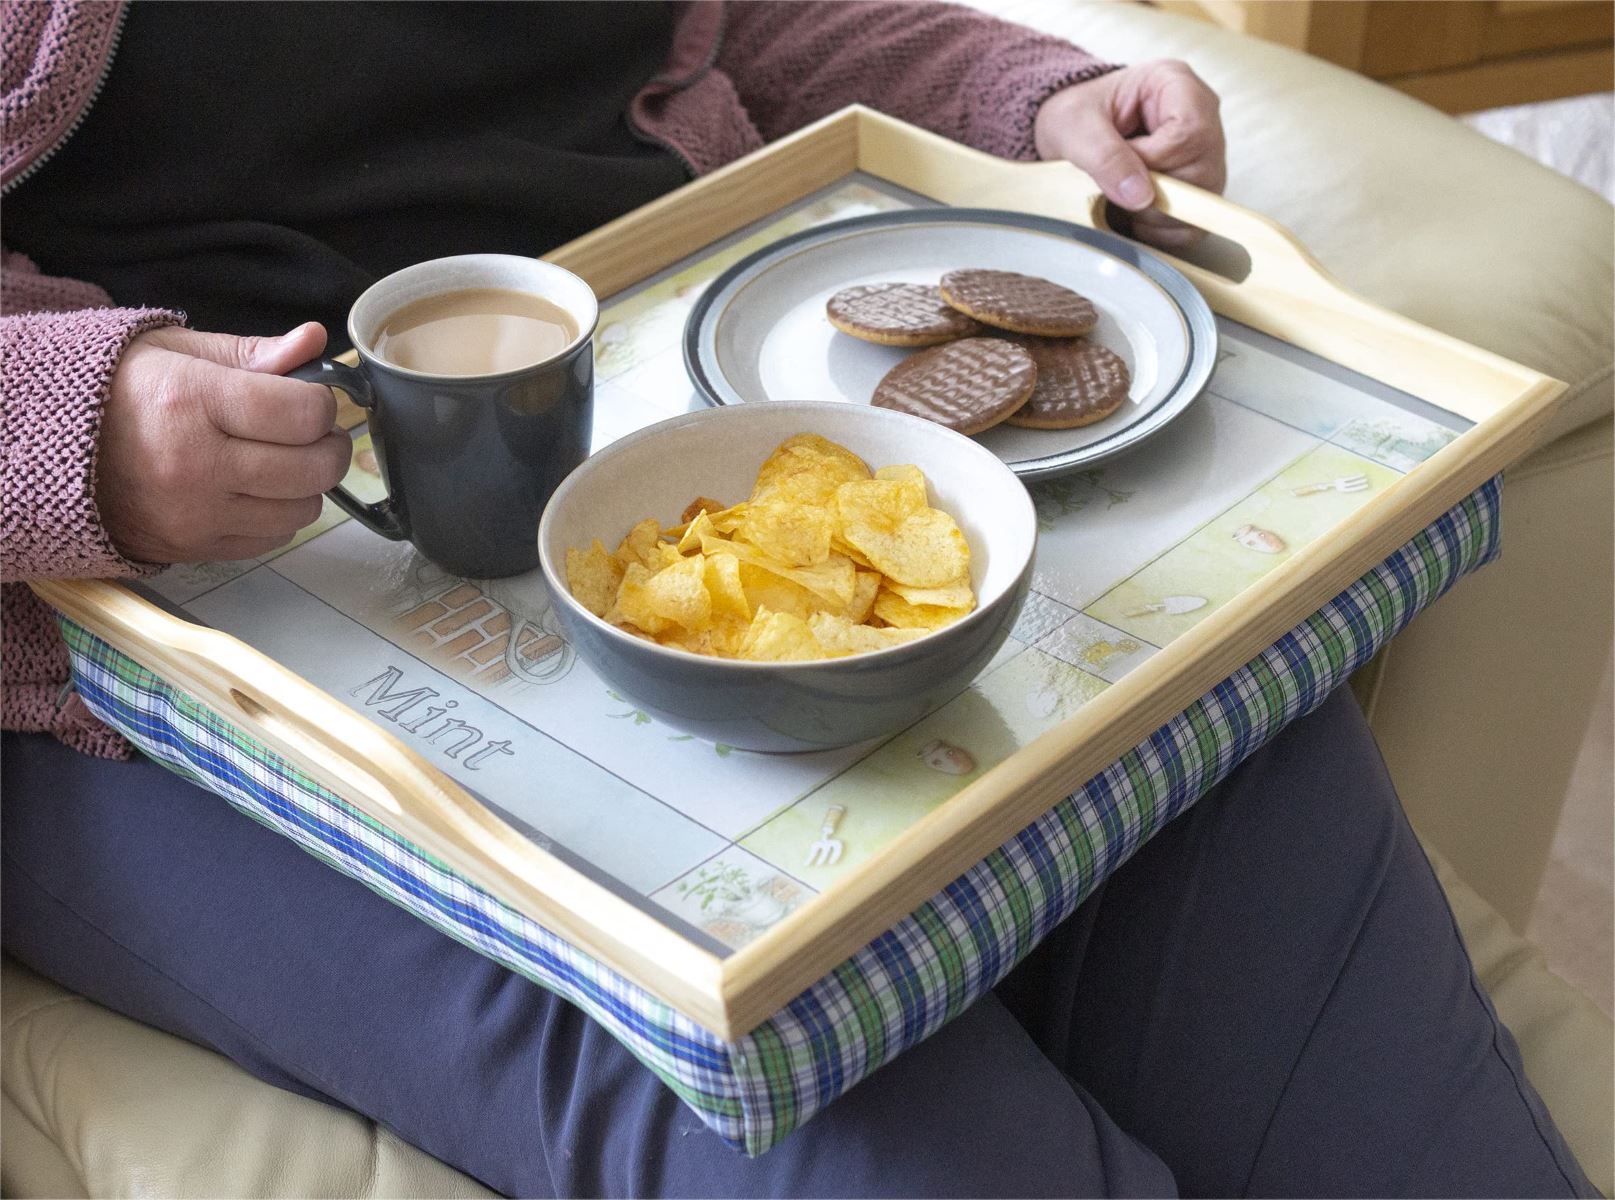 Dinner Trays & Non Slip Lap Trays - Complete Care Shop